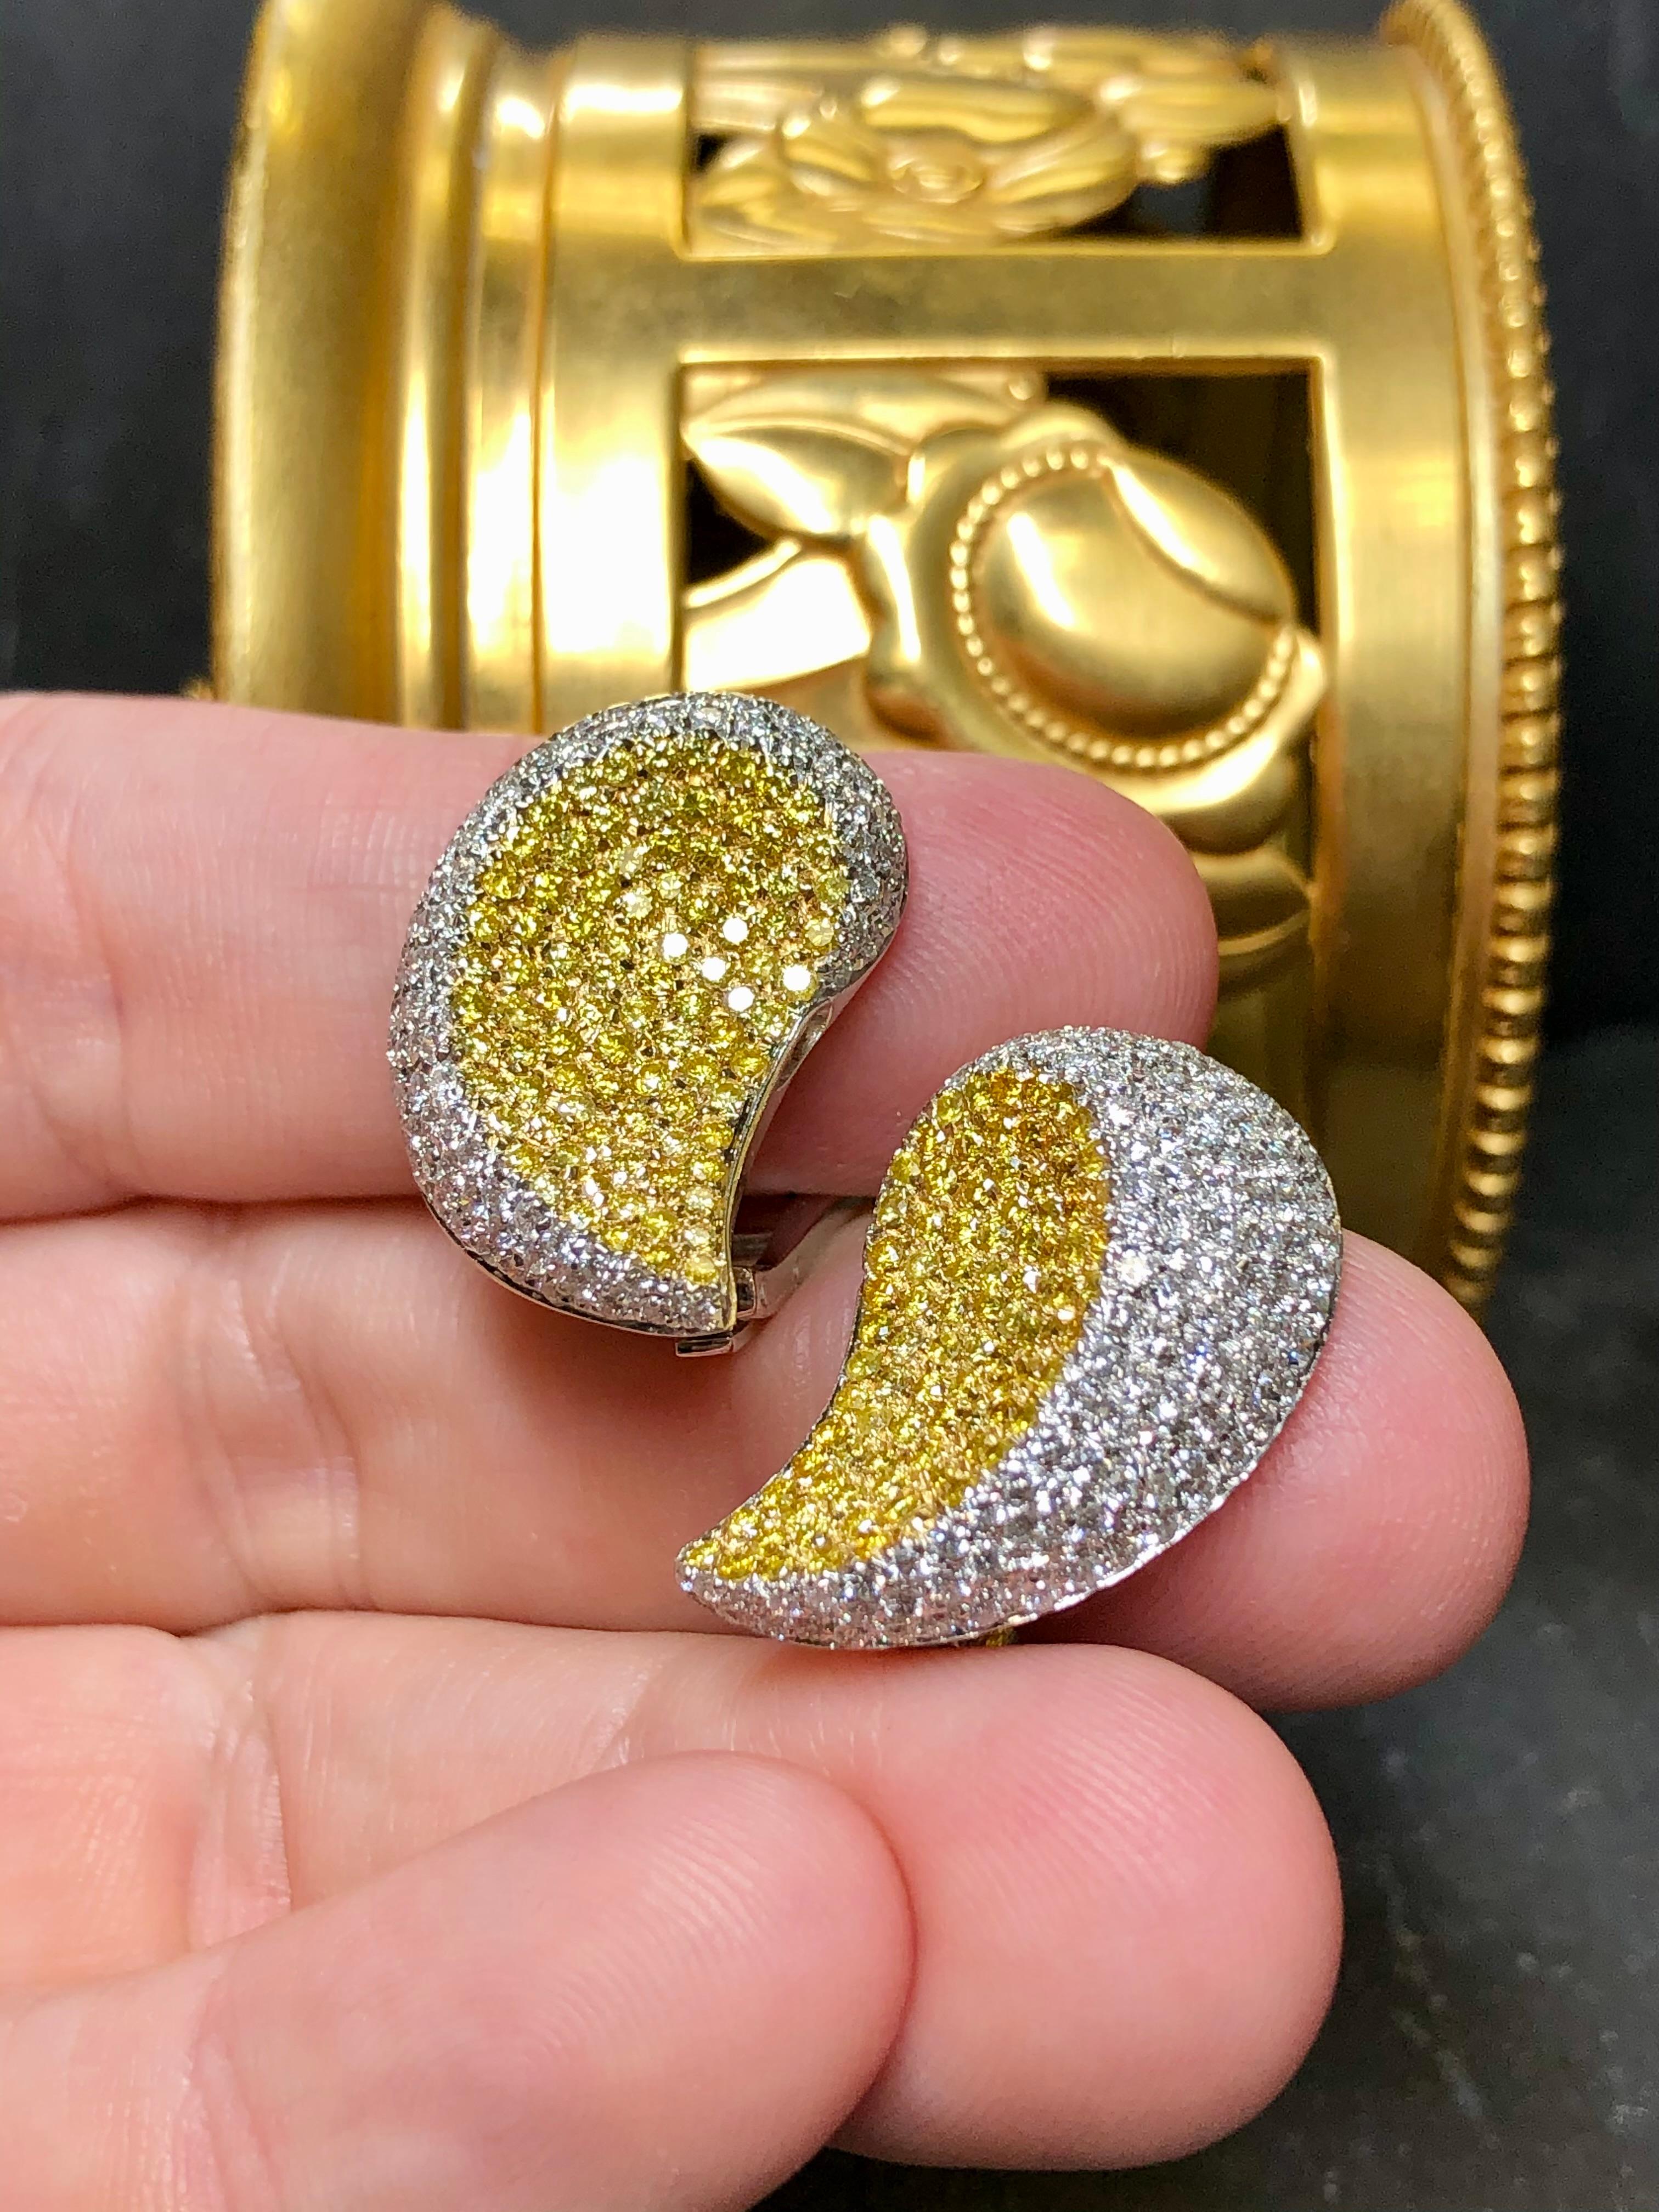 CANTAMESSA 18K Pave White Fancy Yellow Diamond Paisley Huggies Earrings 6.60ctw For Sale 4